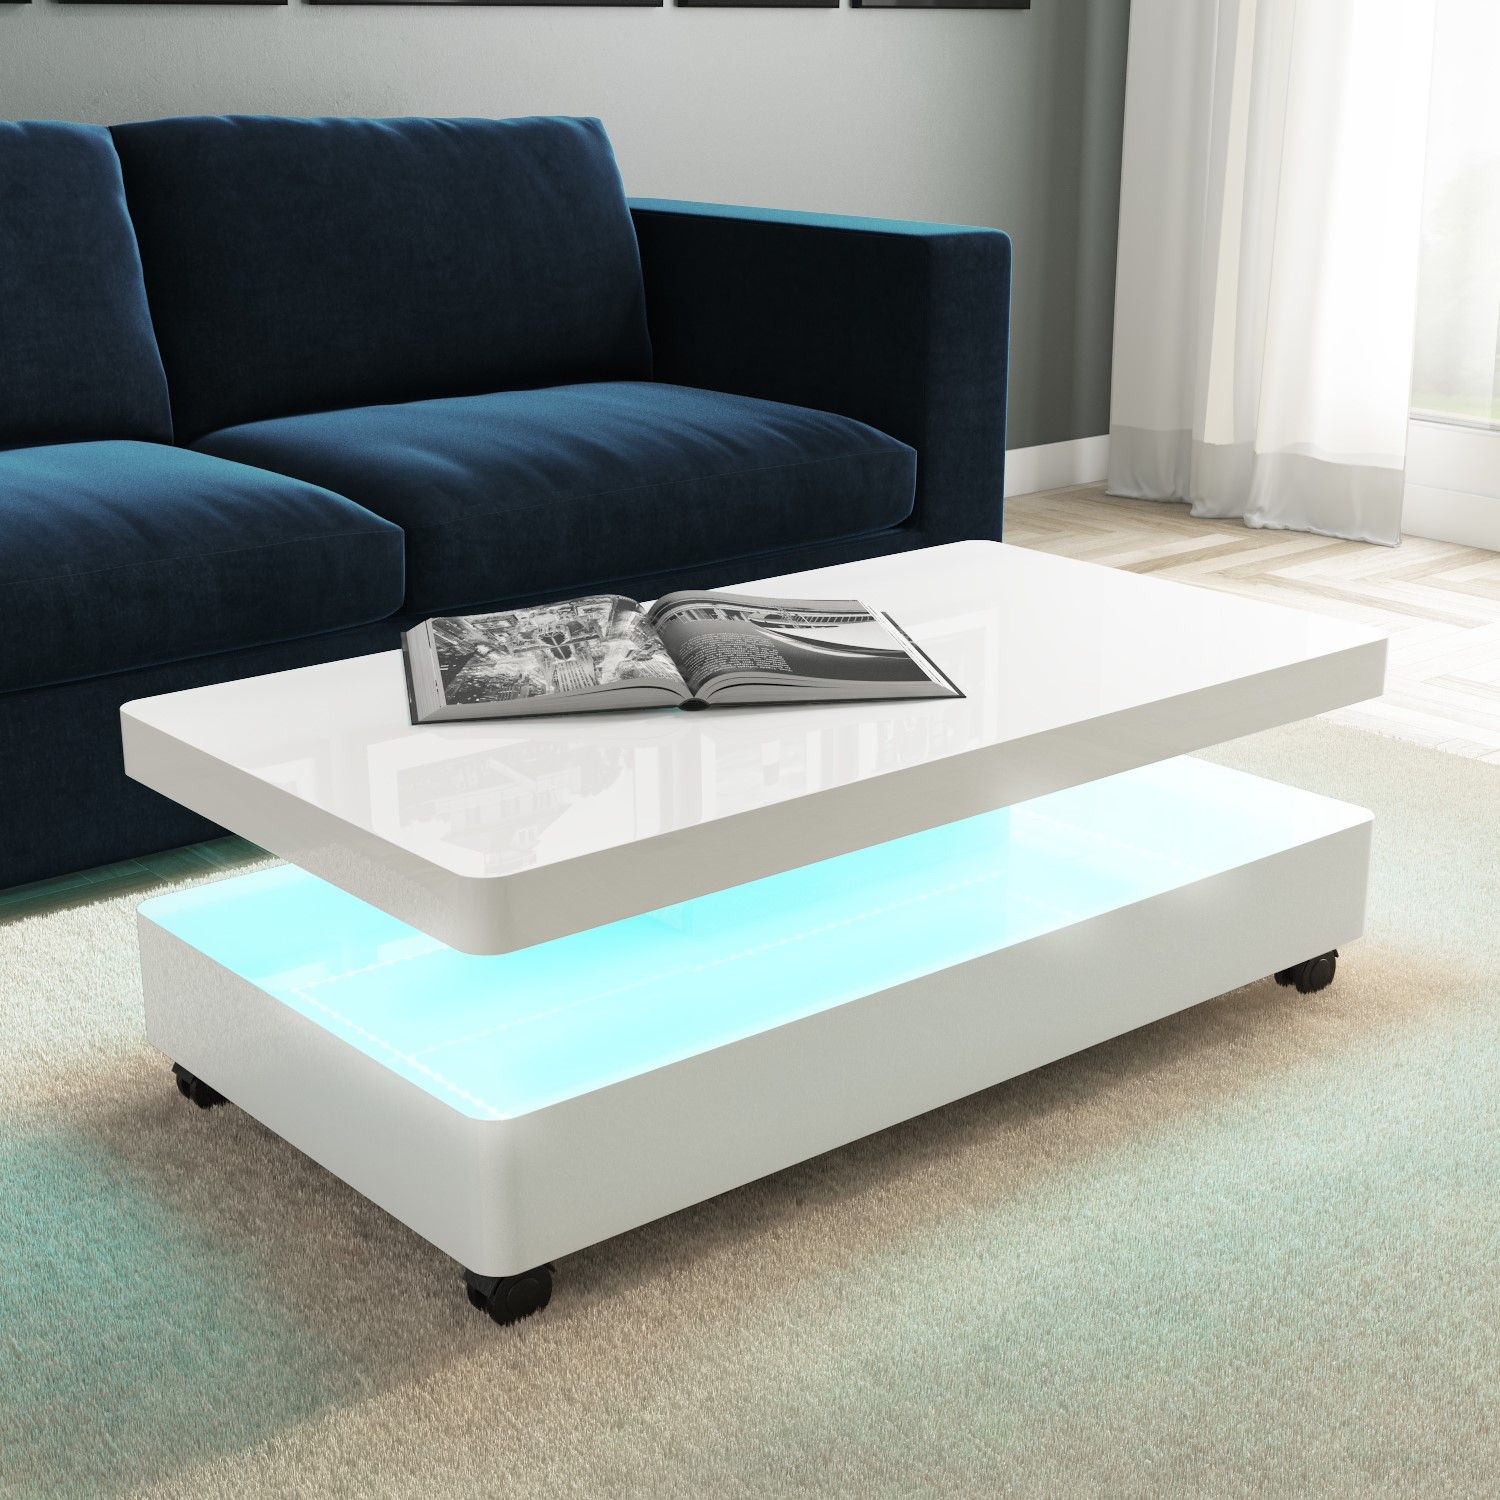 High Gloss White Coffee Table With Led Lighting 5060388562168 | Ebay In Rectangular Led Coffee Tables (View 9 of 15)